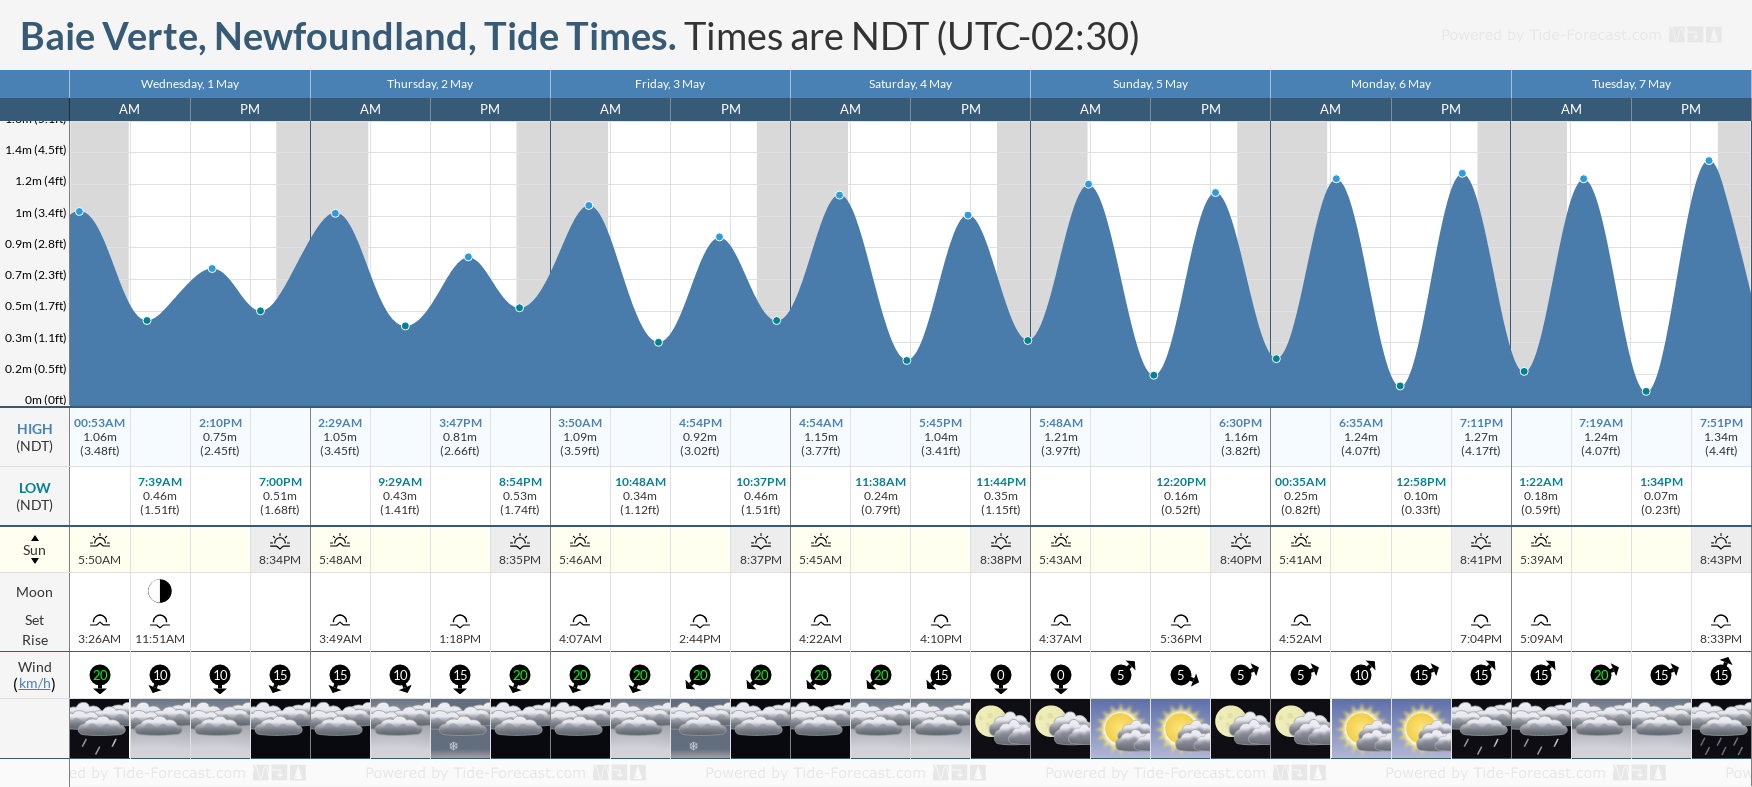 Baie Verte, Newfoundland Tide Chart including high and low tide tide times for the next 7 days